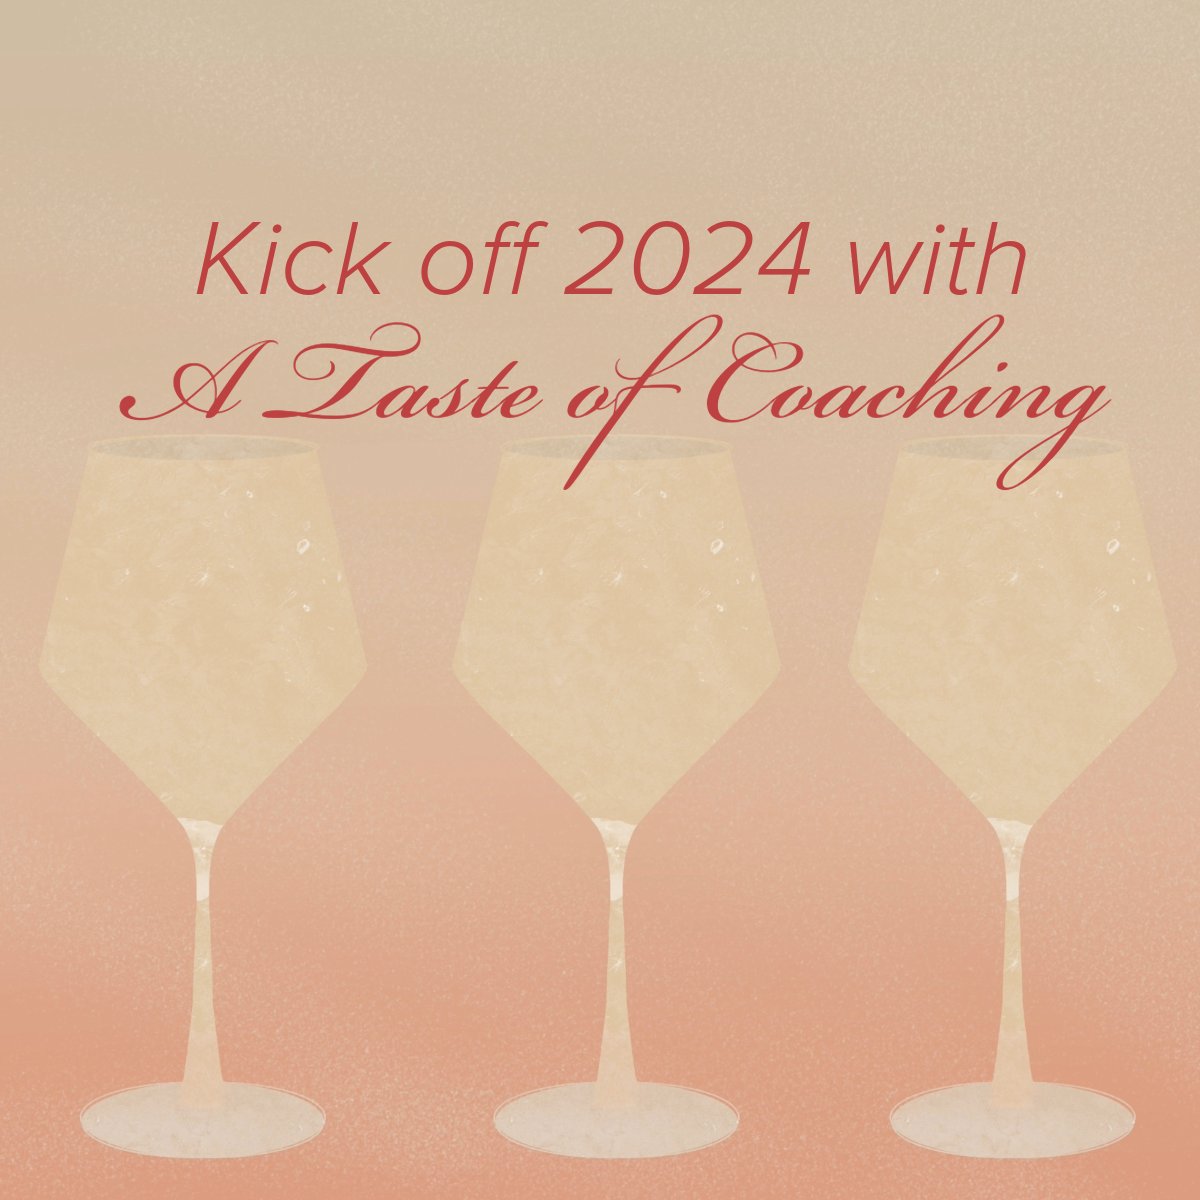 Are you ready to reach your writing goals in 2024? Why not kick it off with a Taste of Coaching? This is a free session to see if coaching is a good fit for you.  Send me a message if you'd like more details! #TasteofCoaching #EnSpireLife #WritingCoach #CreativeCoach #2024Goals